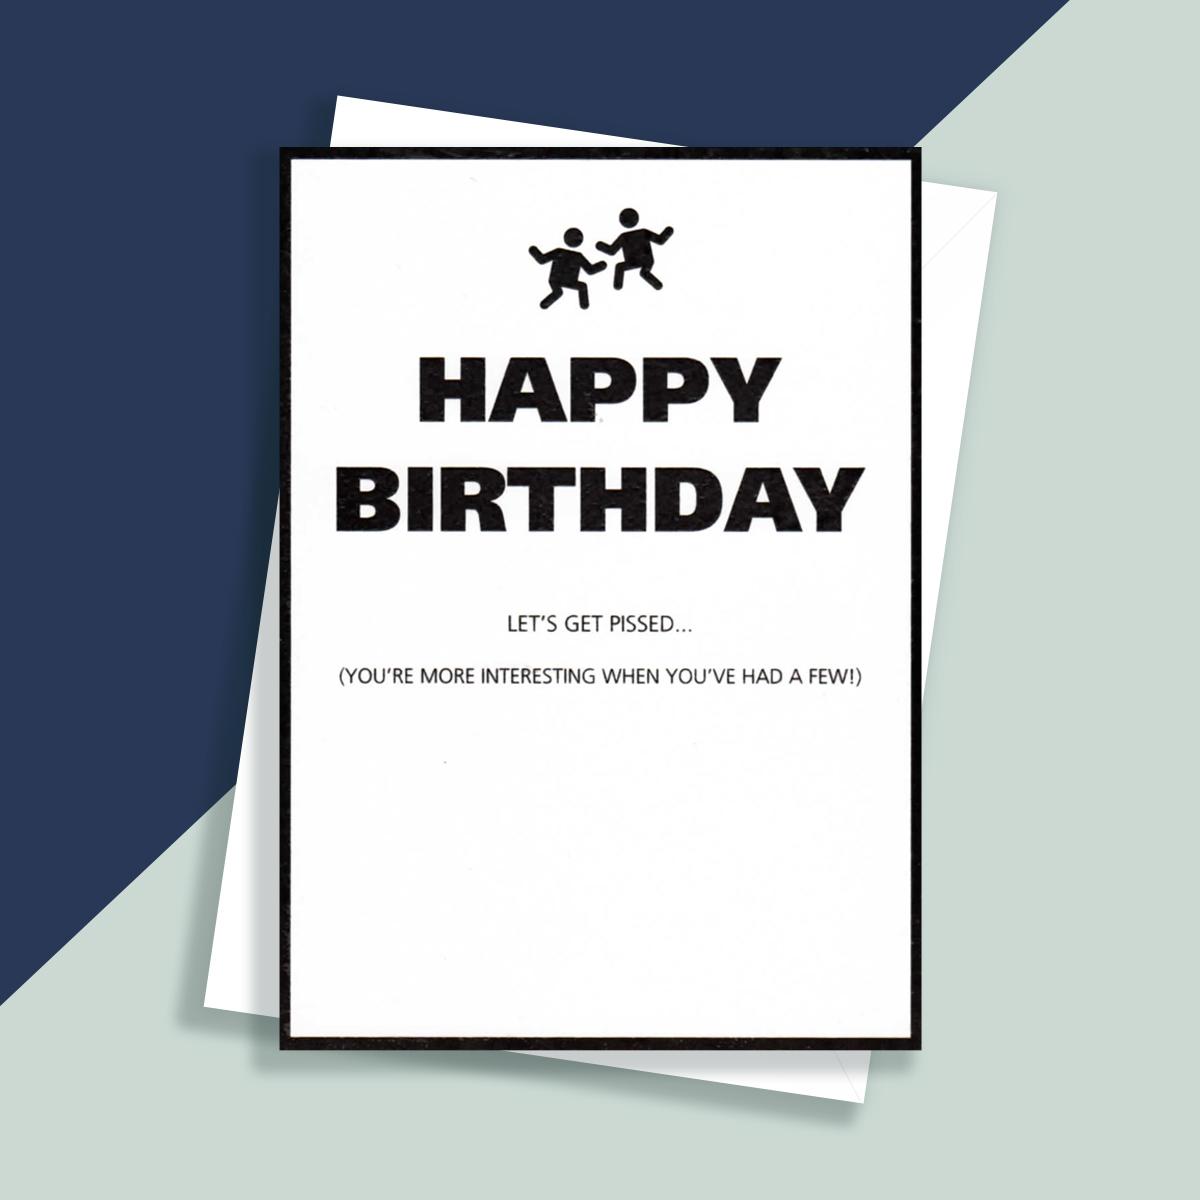 Let's Get Pissed Happy Birthday Funny Card